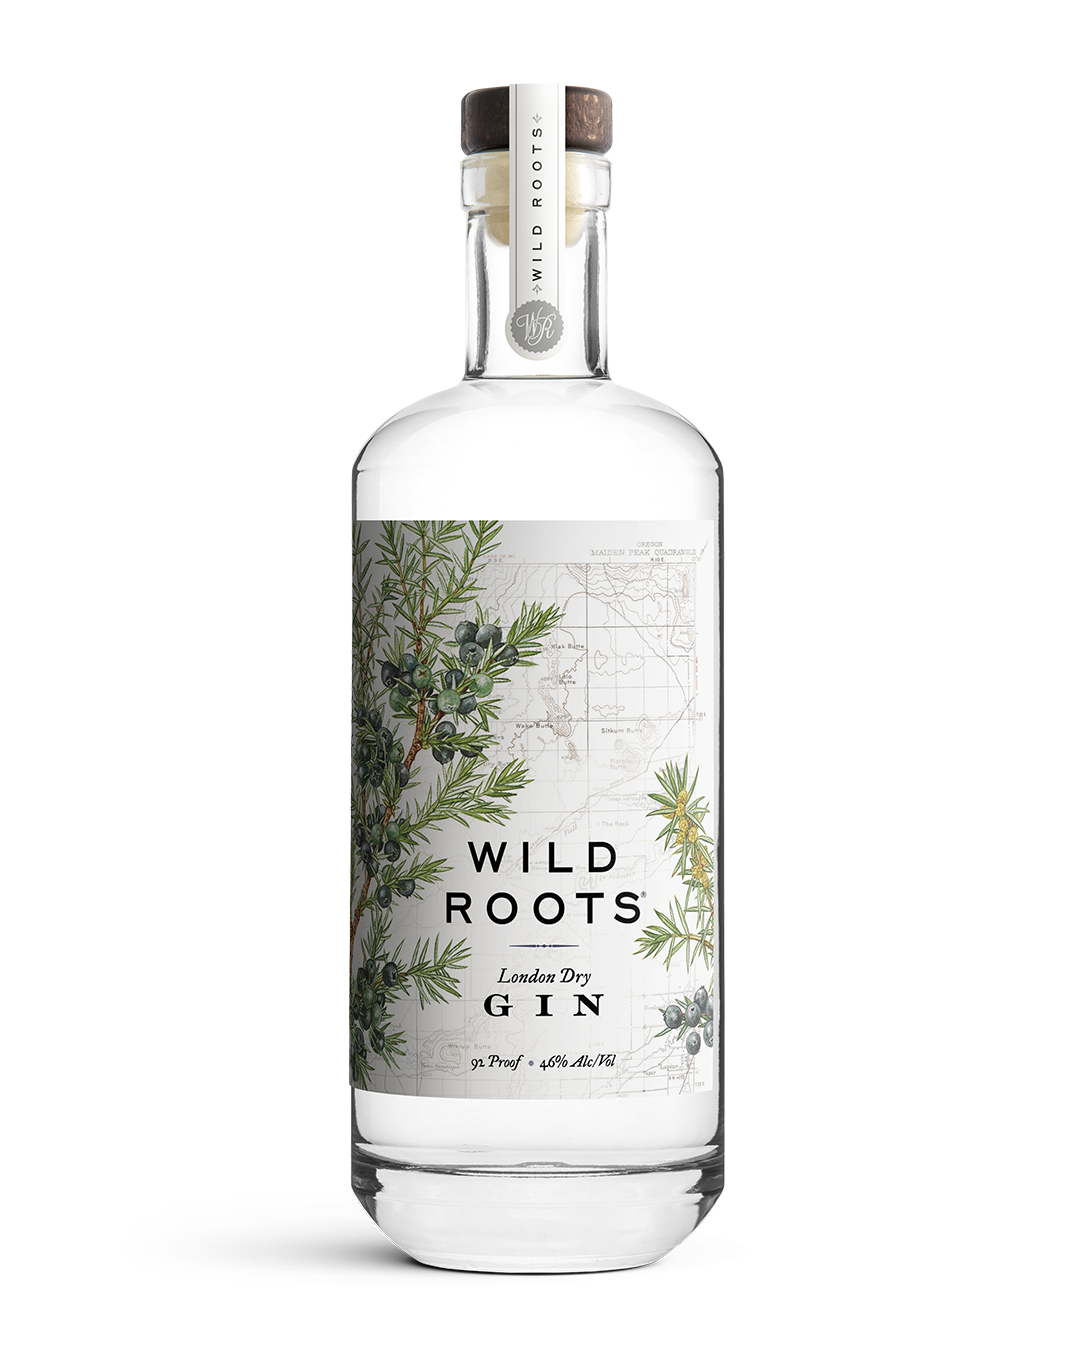 London Dry Gin – Wild Roots